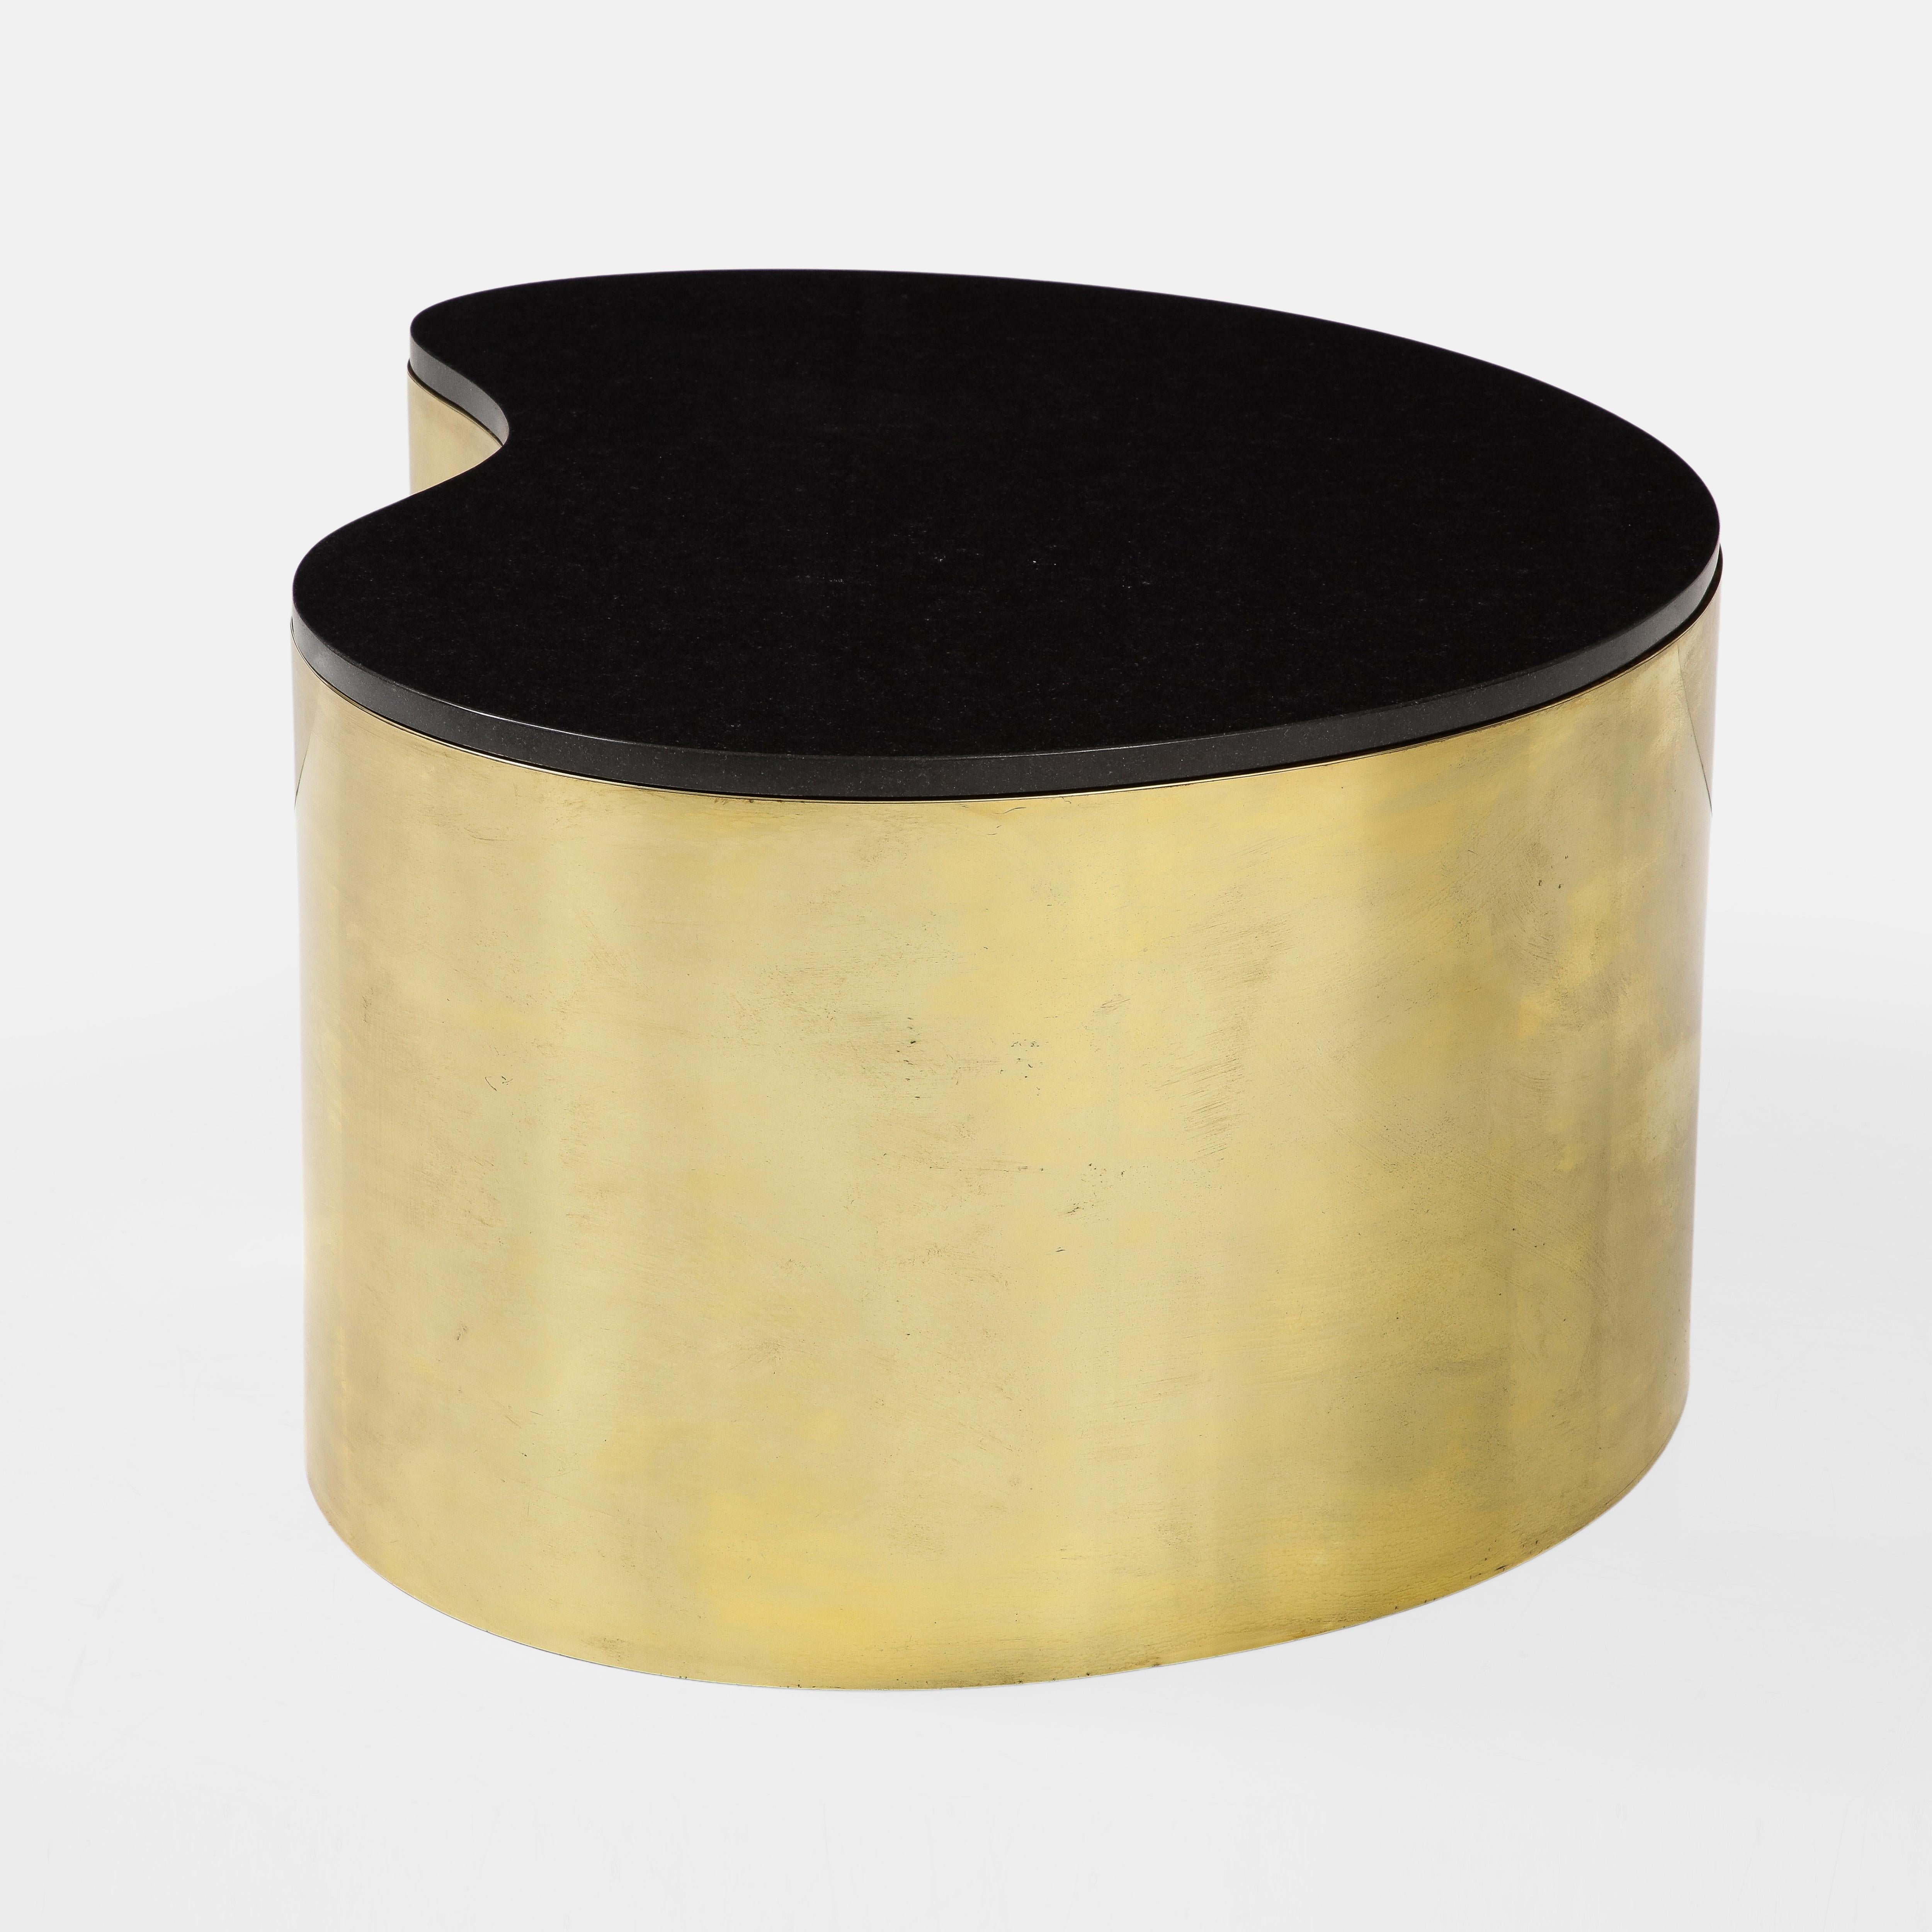 American Karl Springer Freeform Coffee Table in Brass and Black Granite Top, 1970s For Sale